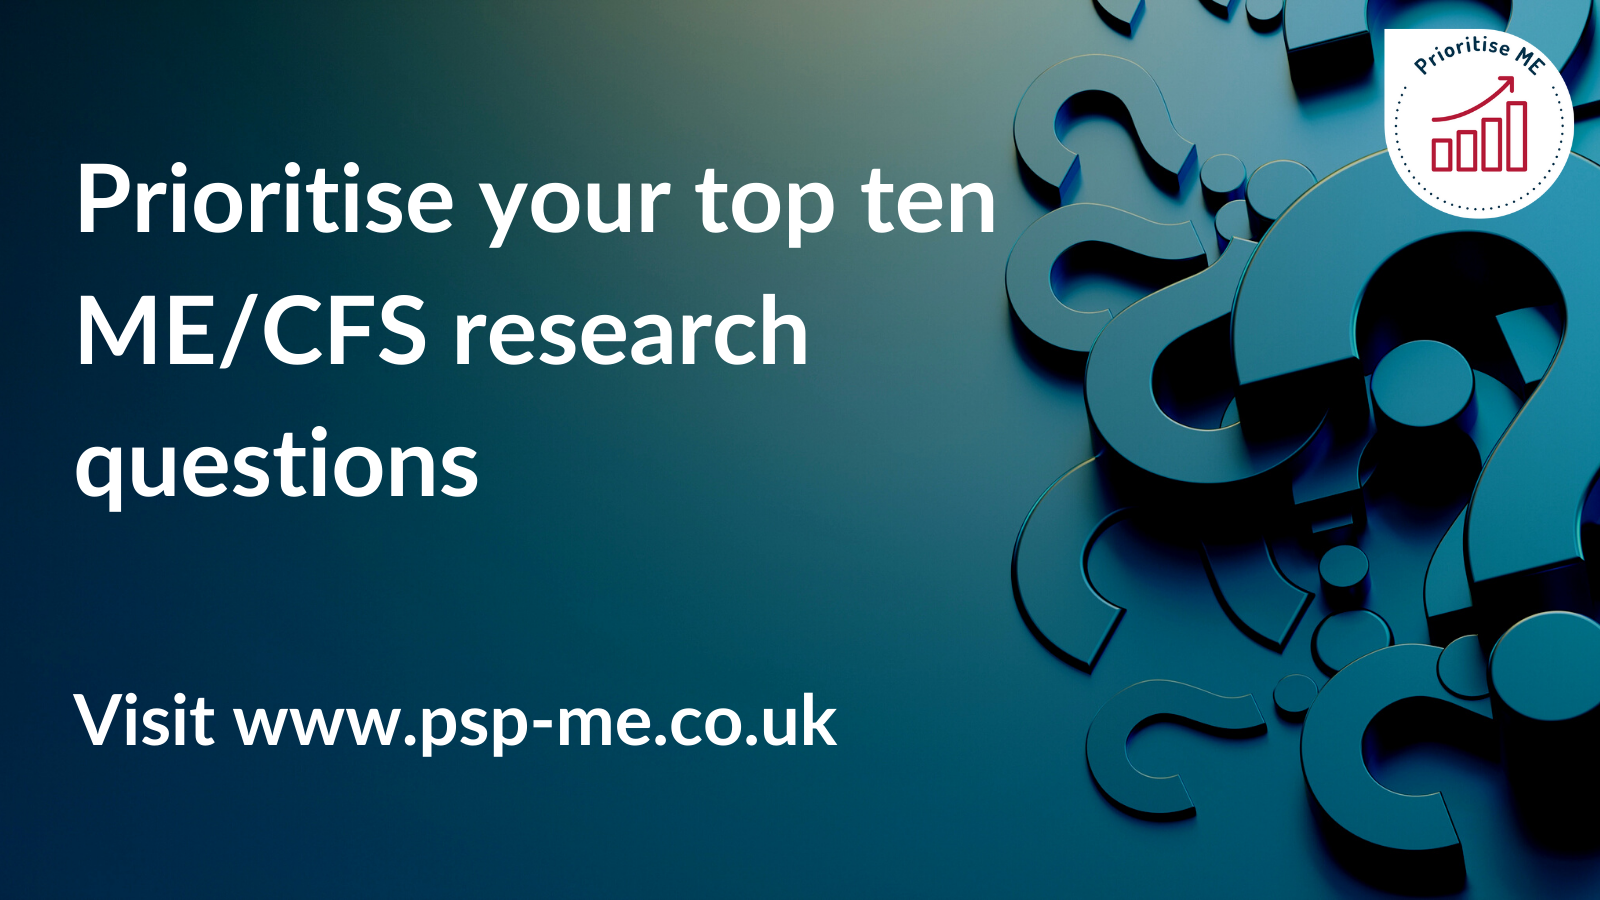 Choose your top ten ME/CFS research priorities – survey launched!